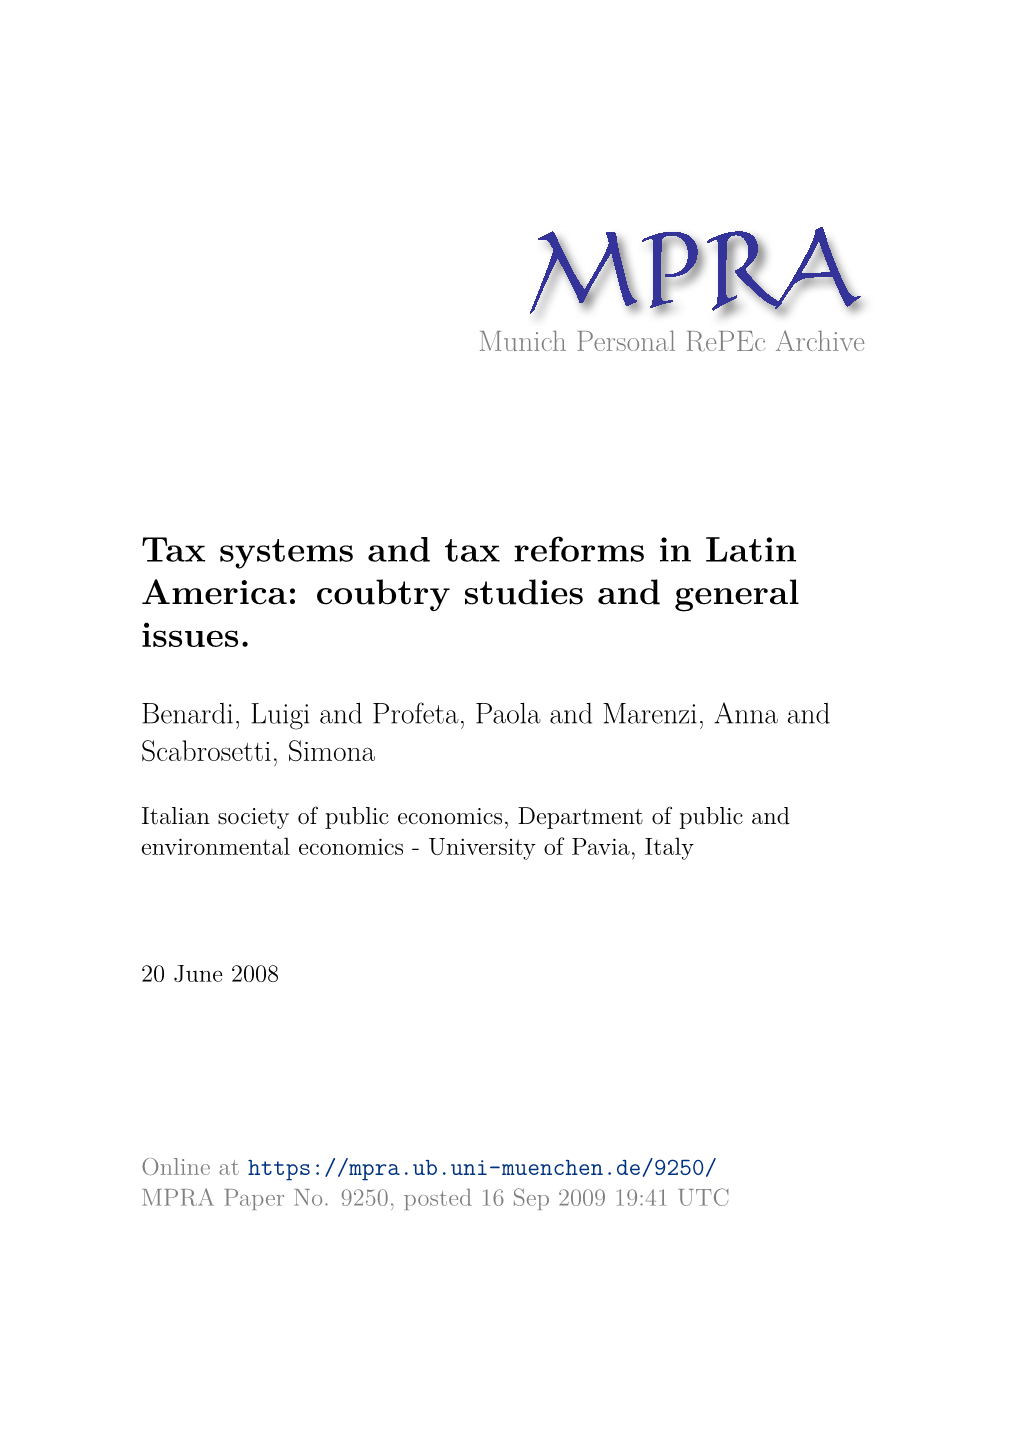 Tax Systems and Tax Reforms in Latin America: Coubtry Studies and General Issues